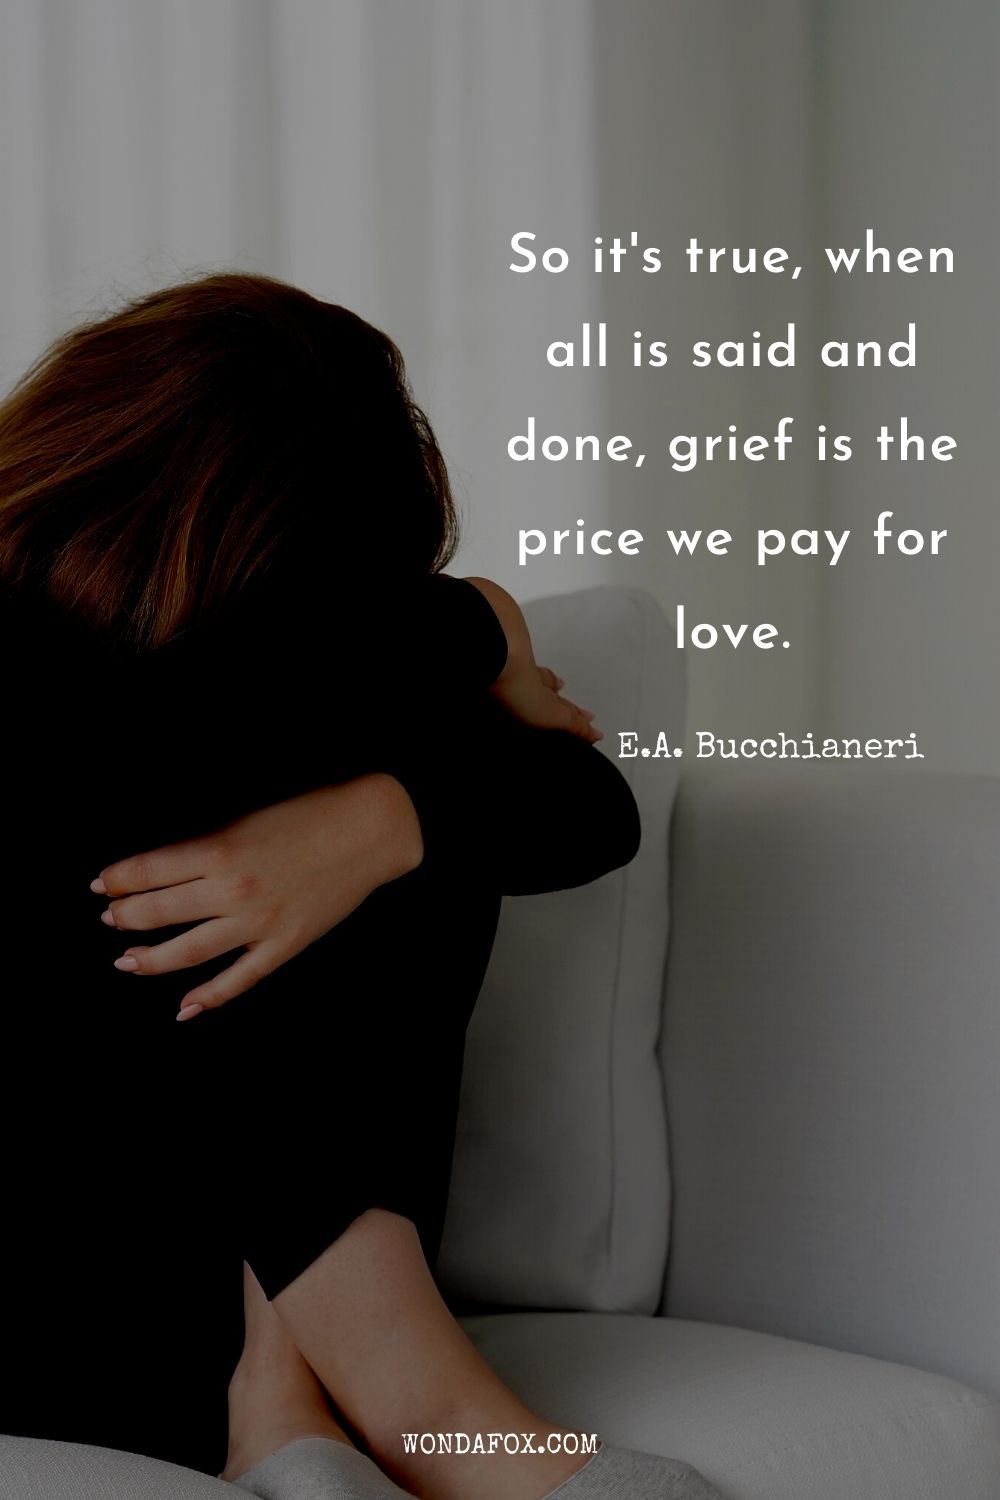 So it's true, when all is said and done, grief is the price we pay for love.